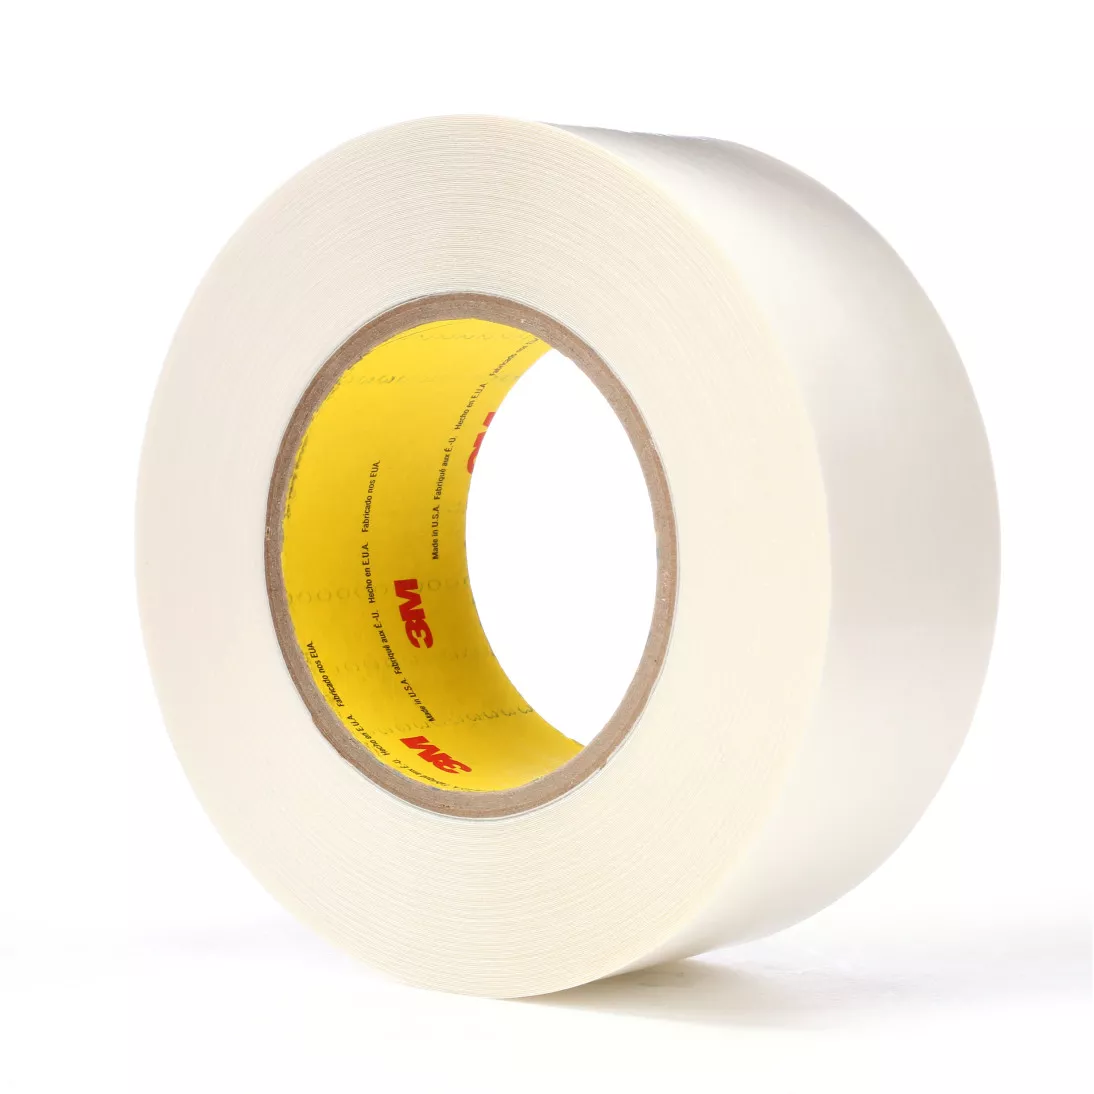 3M™ Double Coated Tape 9579, White, 2 in x 36 yd, 9 mil, 24 rolls per
case